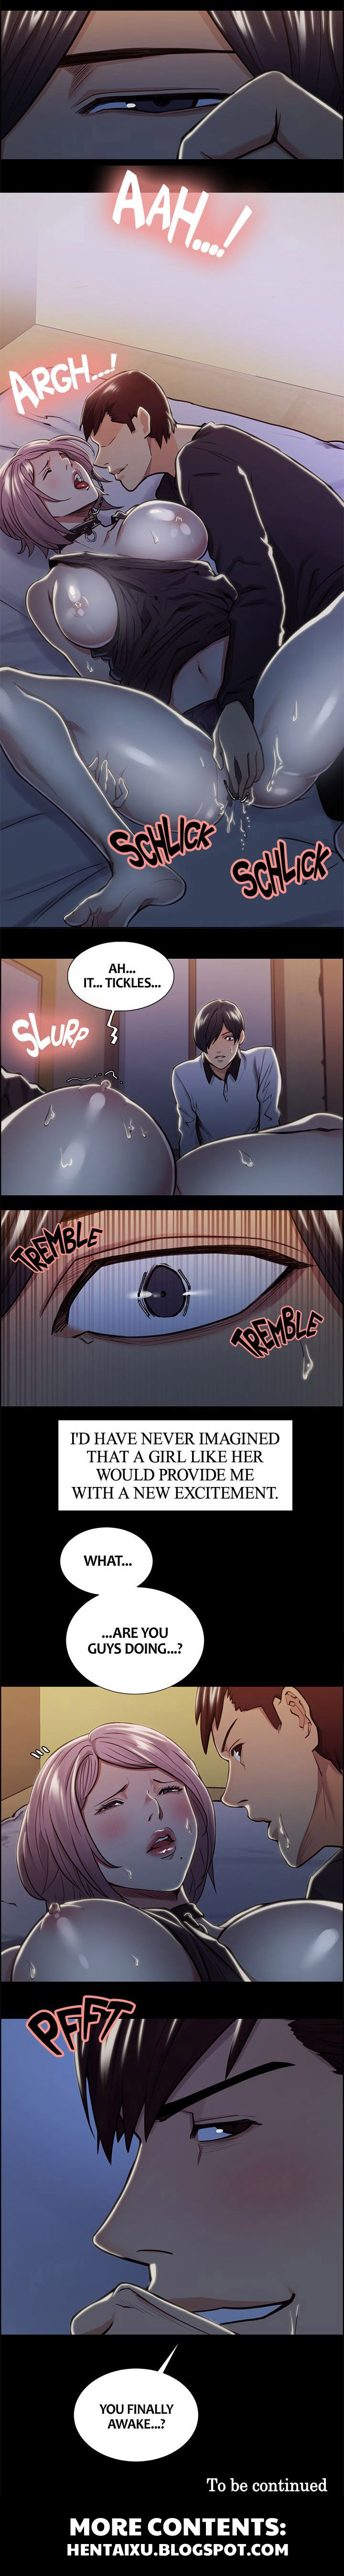 [Serious] Taste of Forbbiden Fruit Ch.17/24 [English] [Hentai Universe] page 393 full